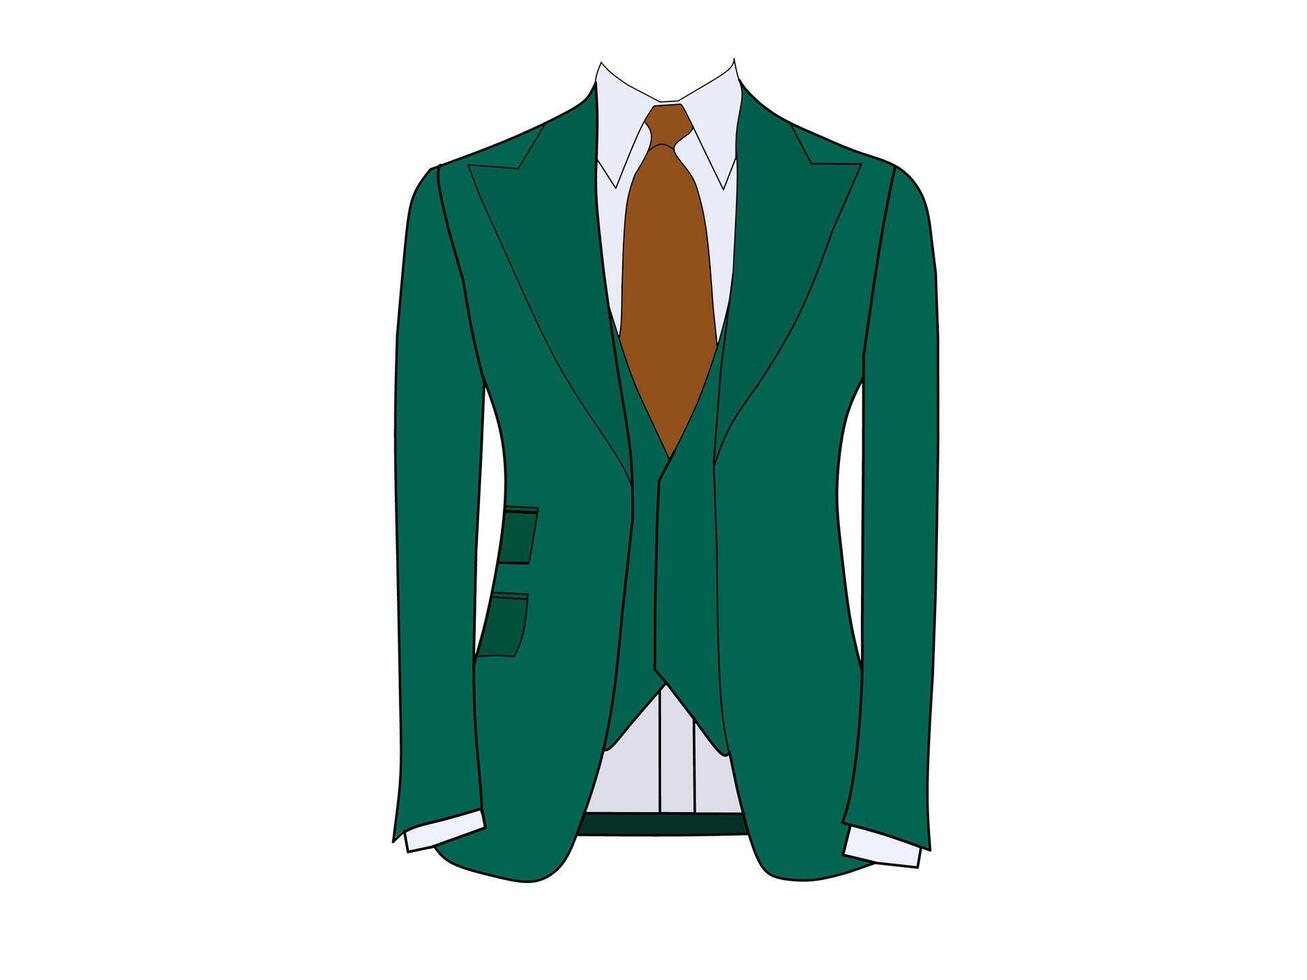 Men's Tuxedo formal wear vector with green color and pink tie.